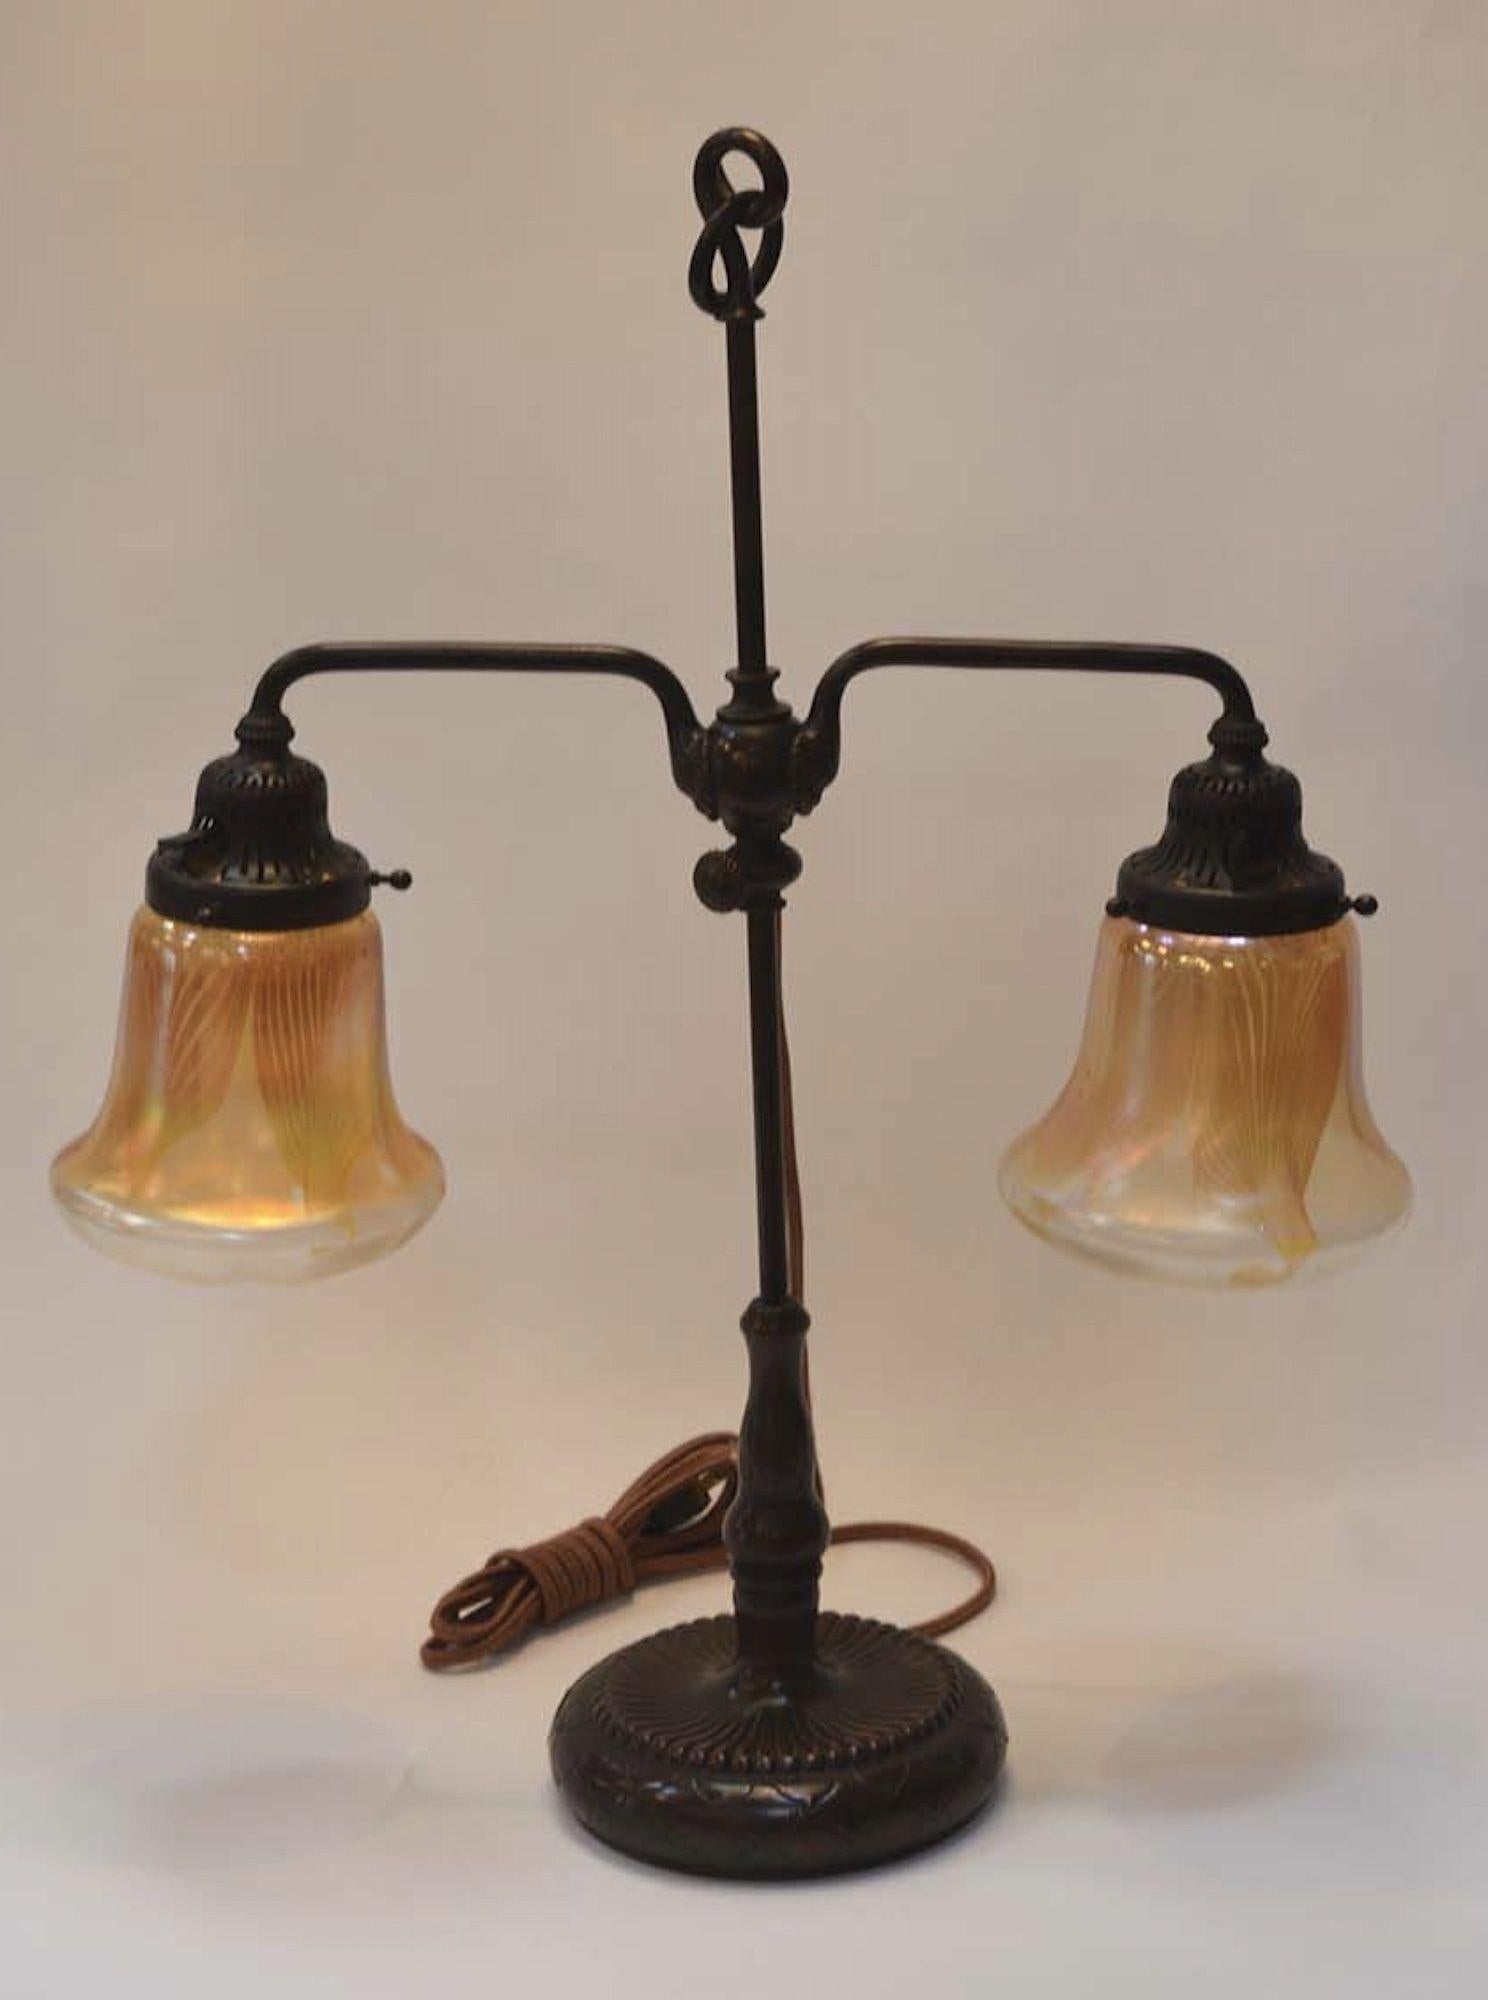 Tiffany Studios two light bronze favrile table lamp. Two bell-shaped favrile glass signed iridescent shades supported by an adjustable bronze two-armed base with bell sockets. The base is signed by Tiffany Studios New York. 